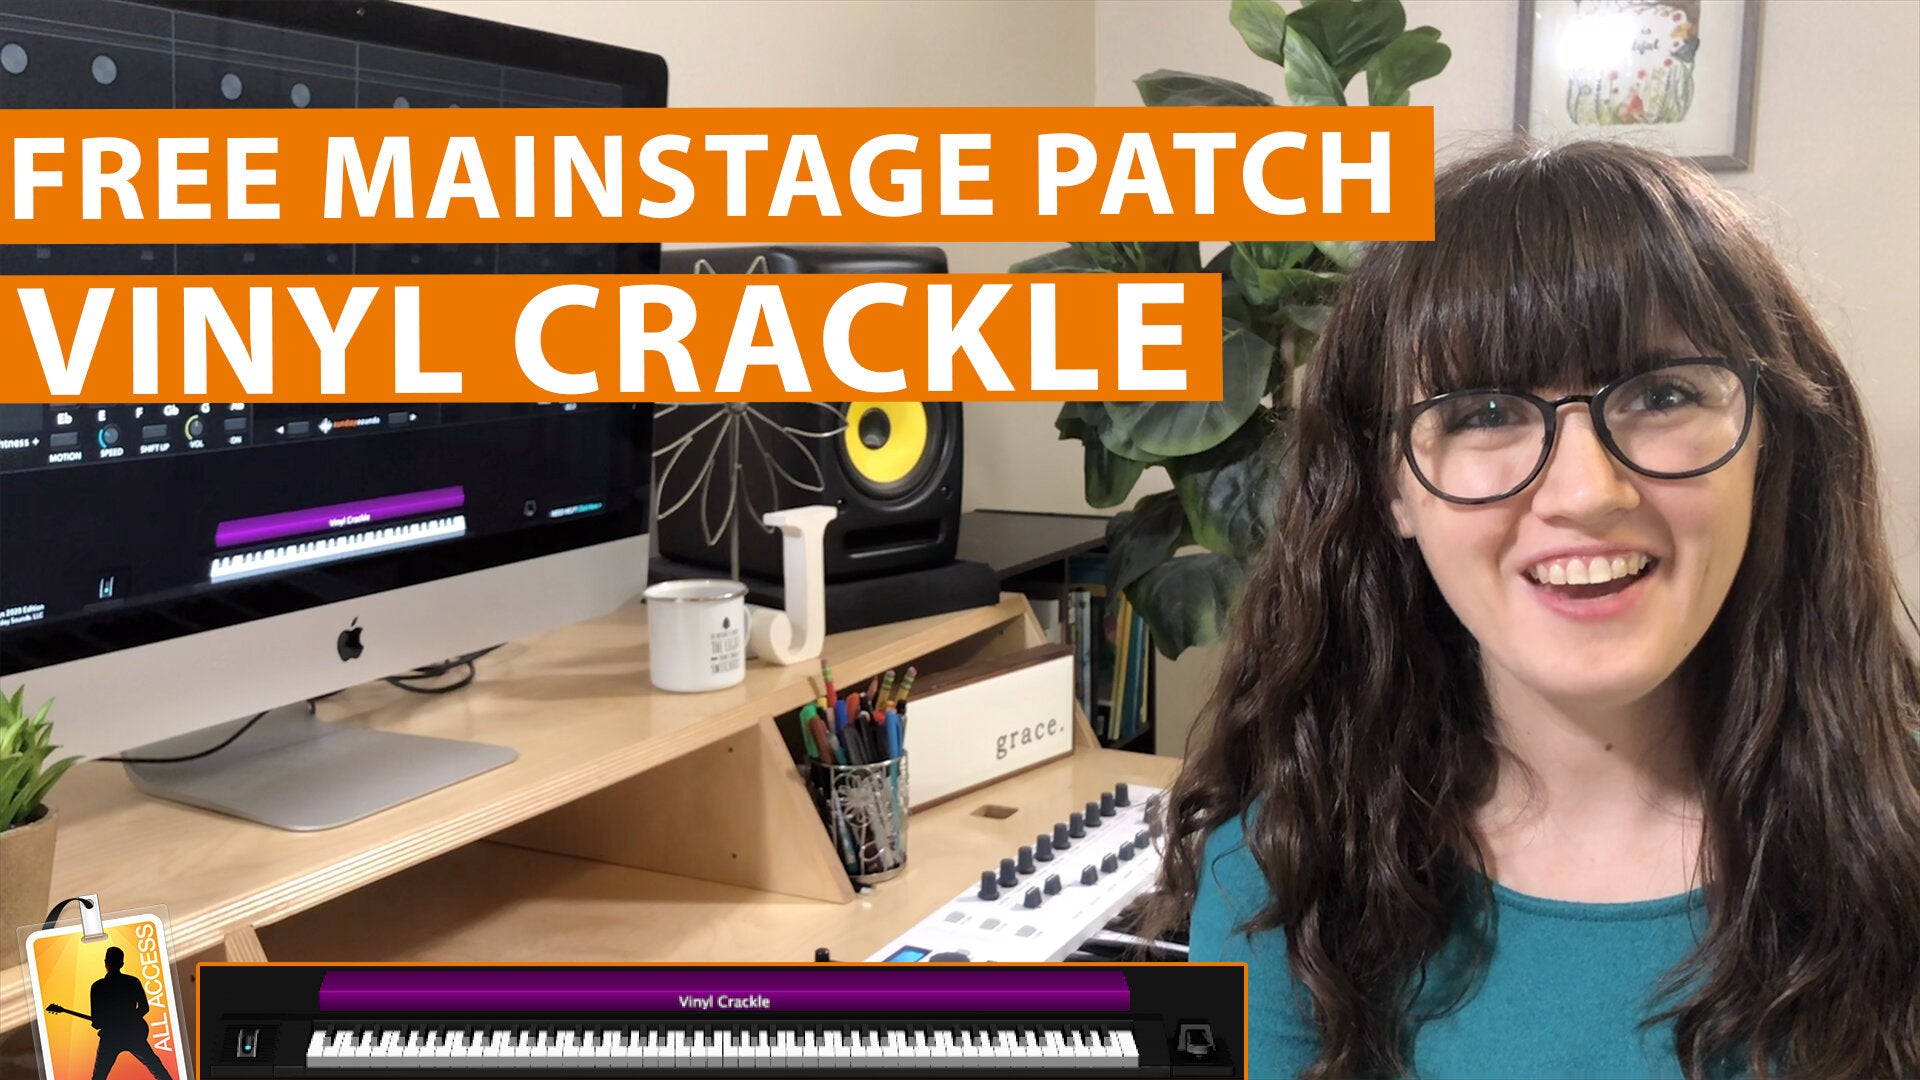 Free MainStage Worship Patch! - Vinyl Crackle